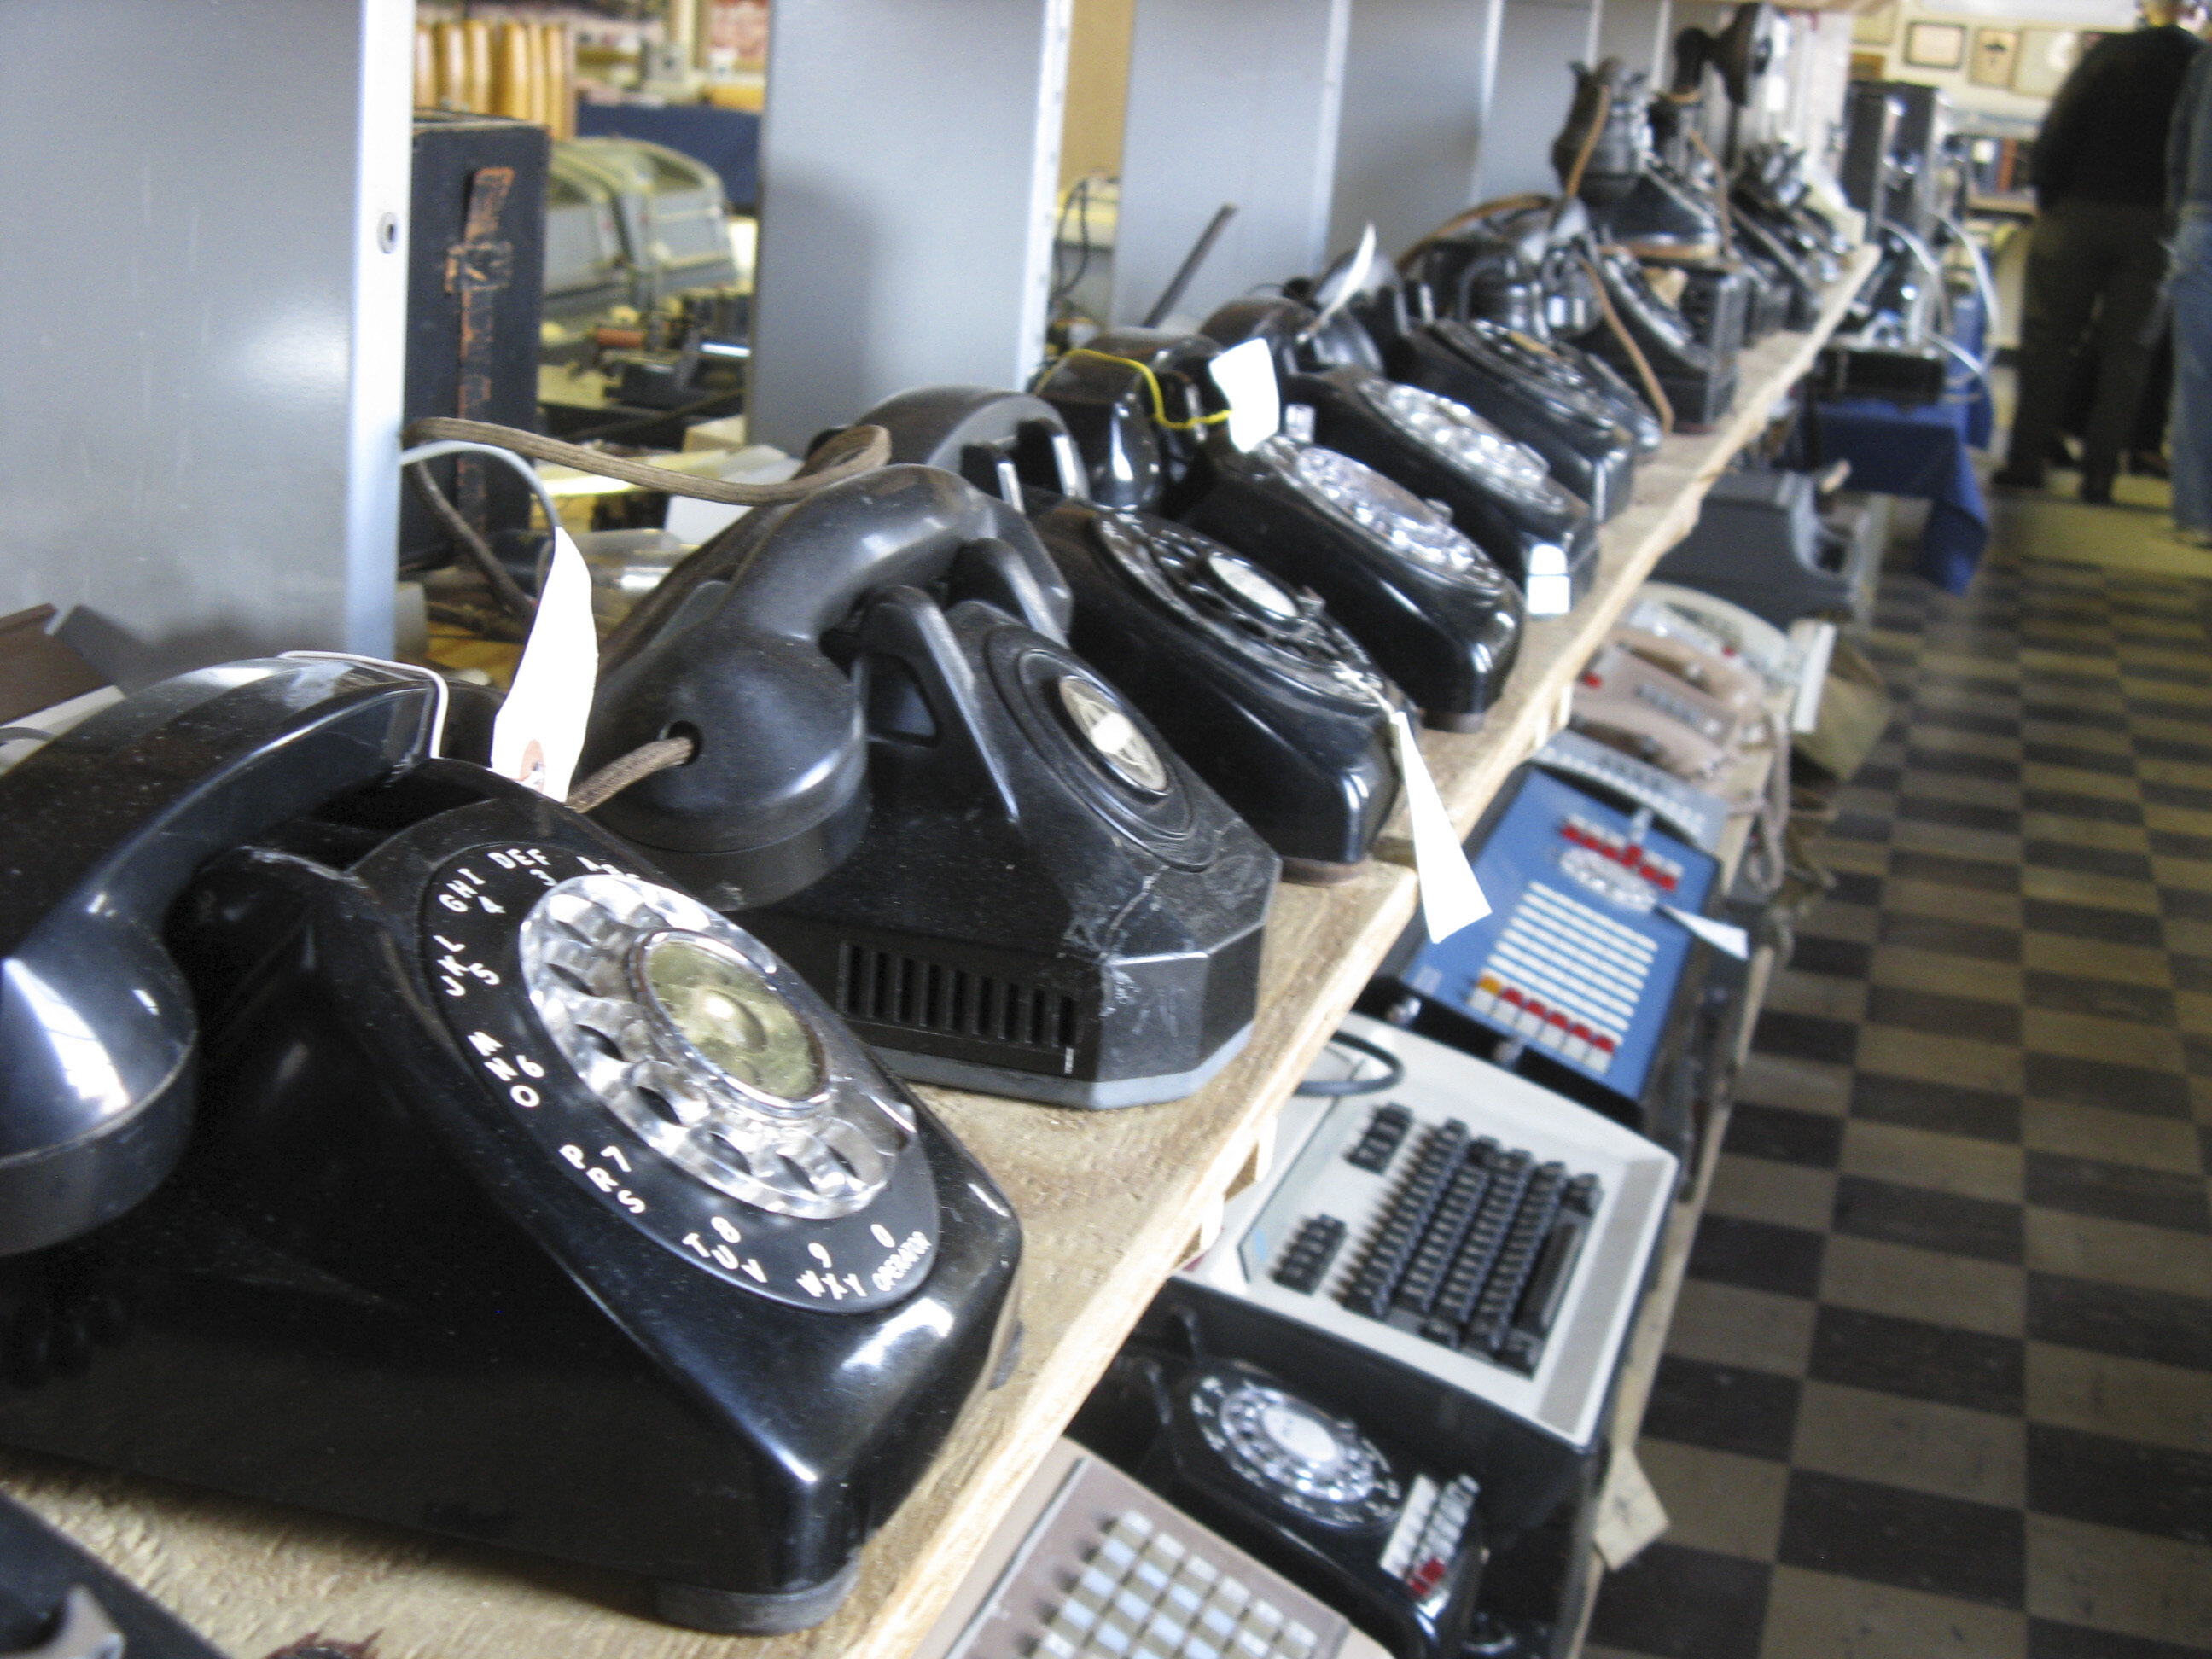 #In the United States, landlines are languishing